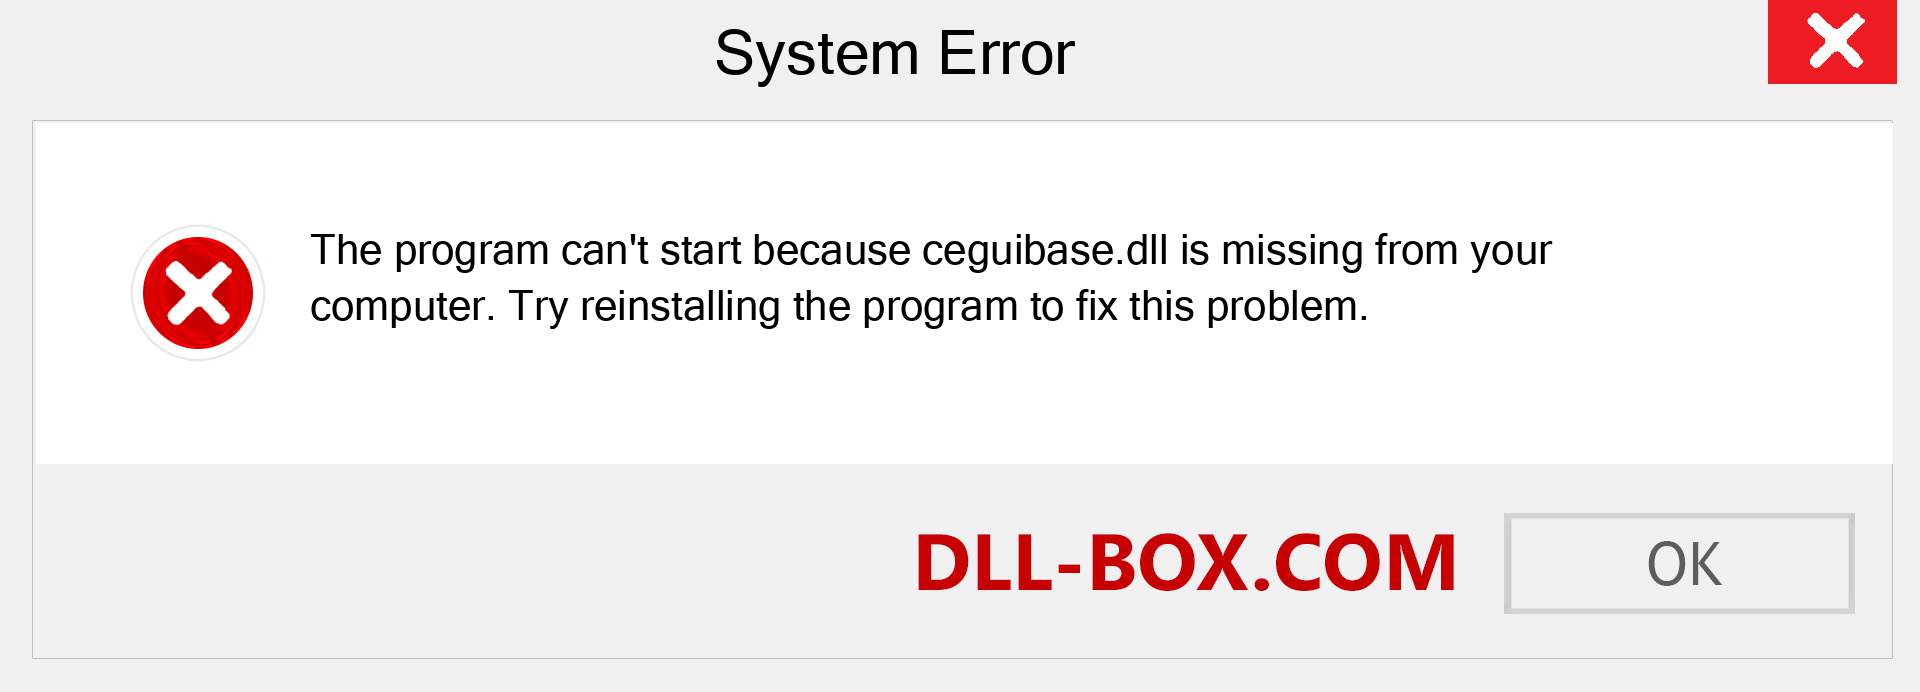  ceguibase.dll file is missing?. Download for Windows 7, 8, 10 - Fix  ceguibase dll Missing Error on Windows, photos, images